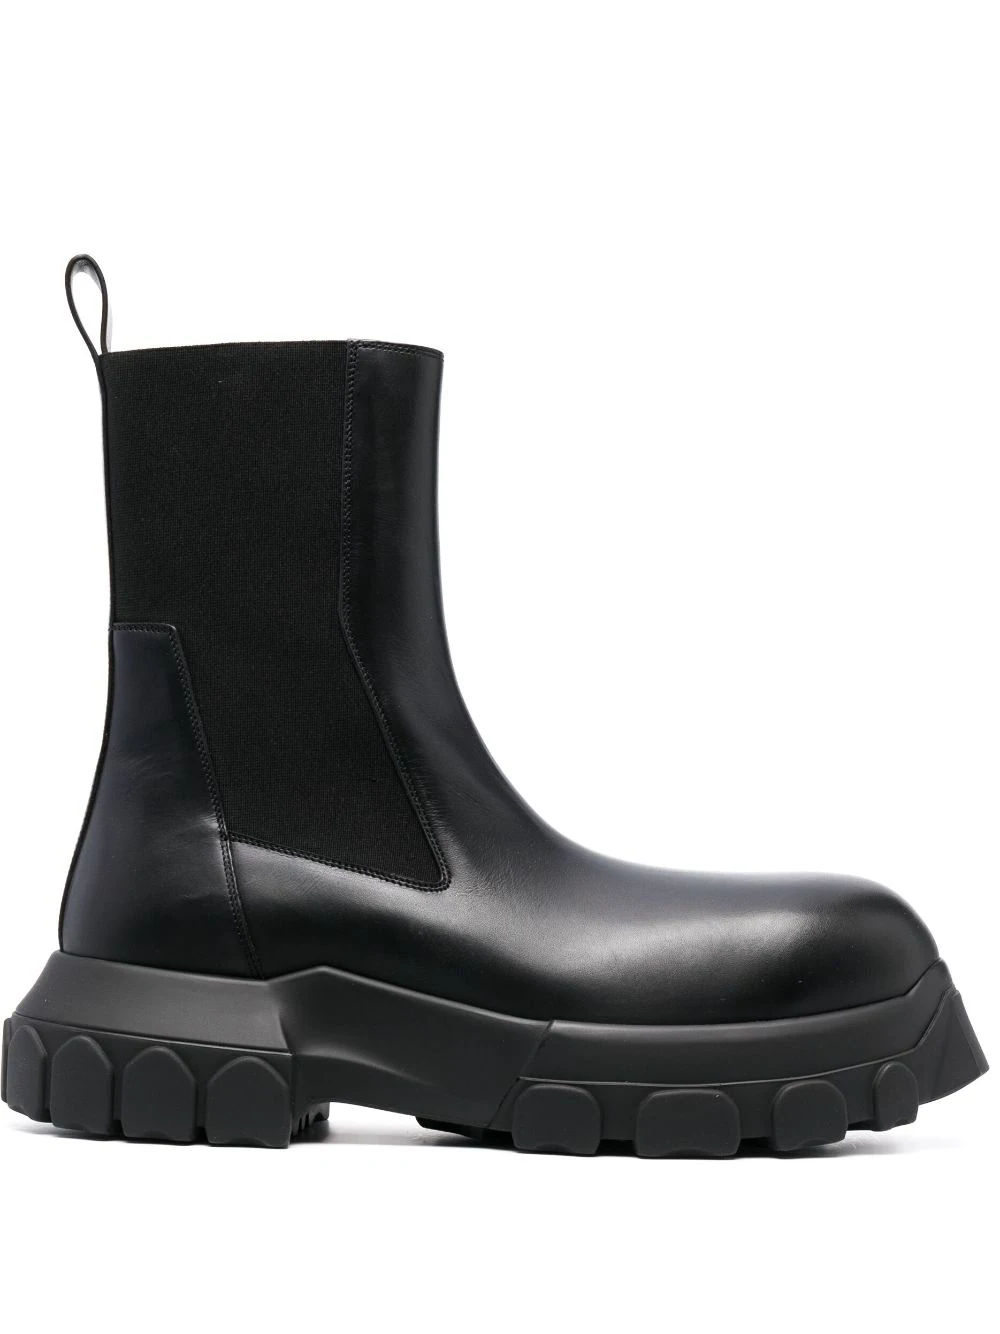 Rick Owens Bozo Tractor Beatle Boots In Black